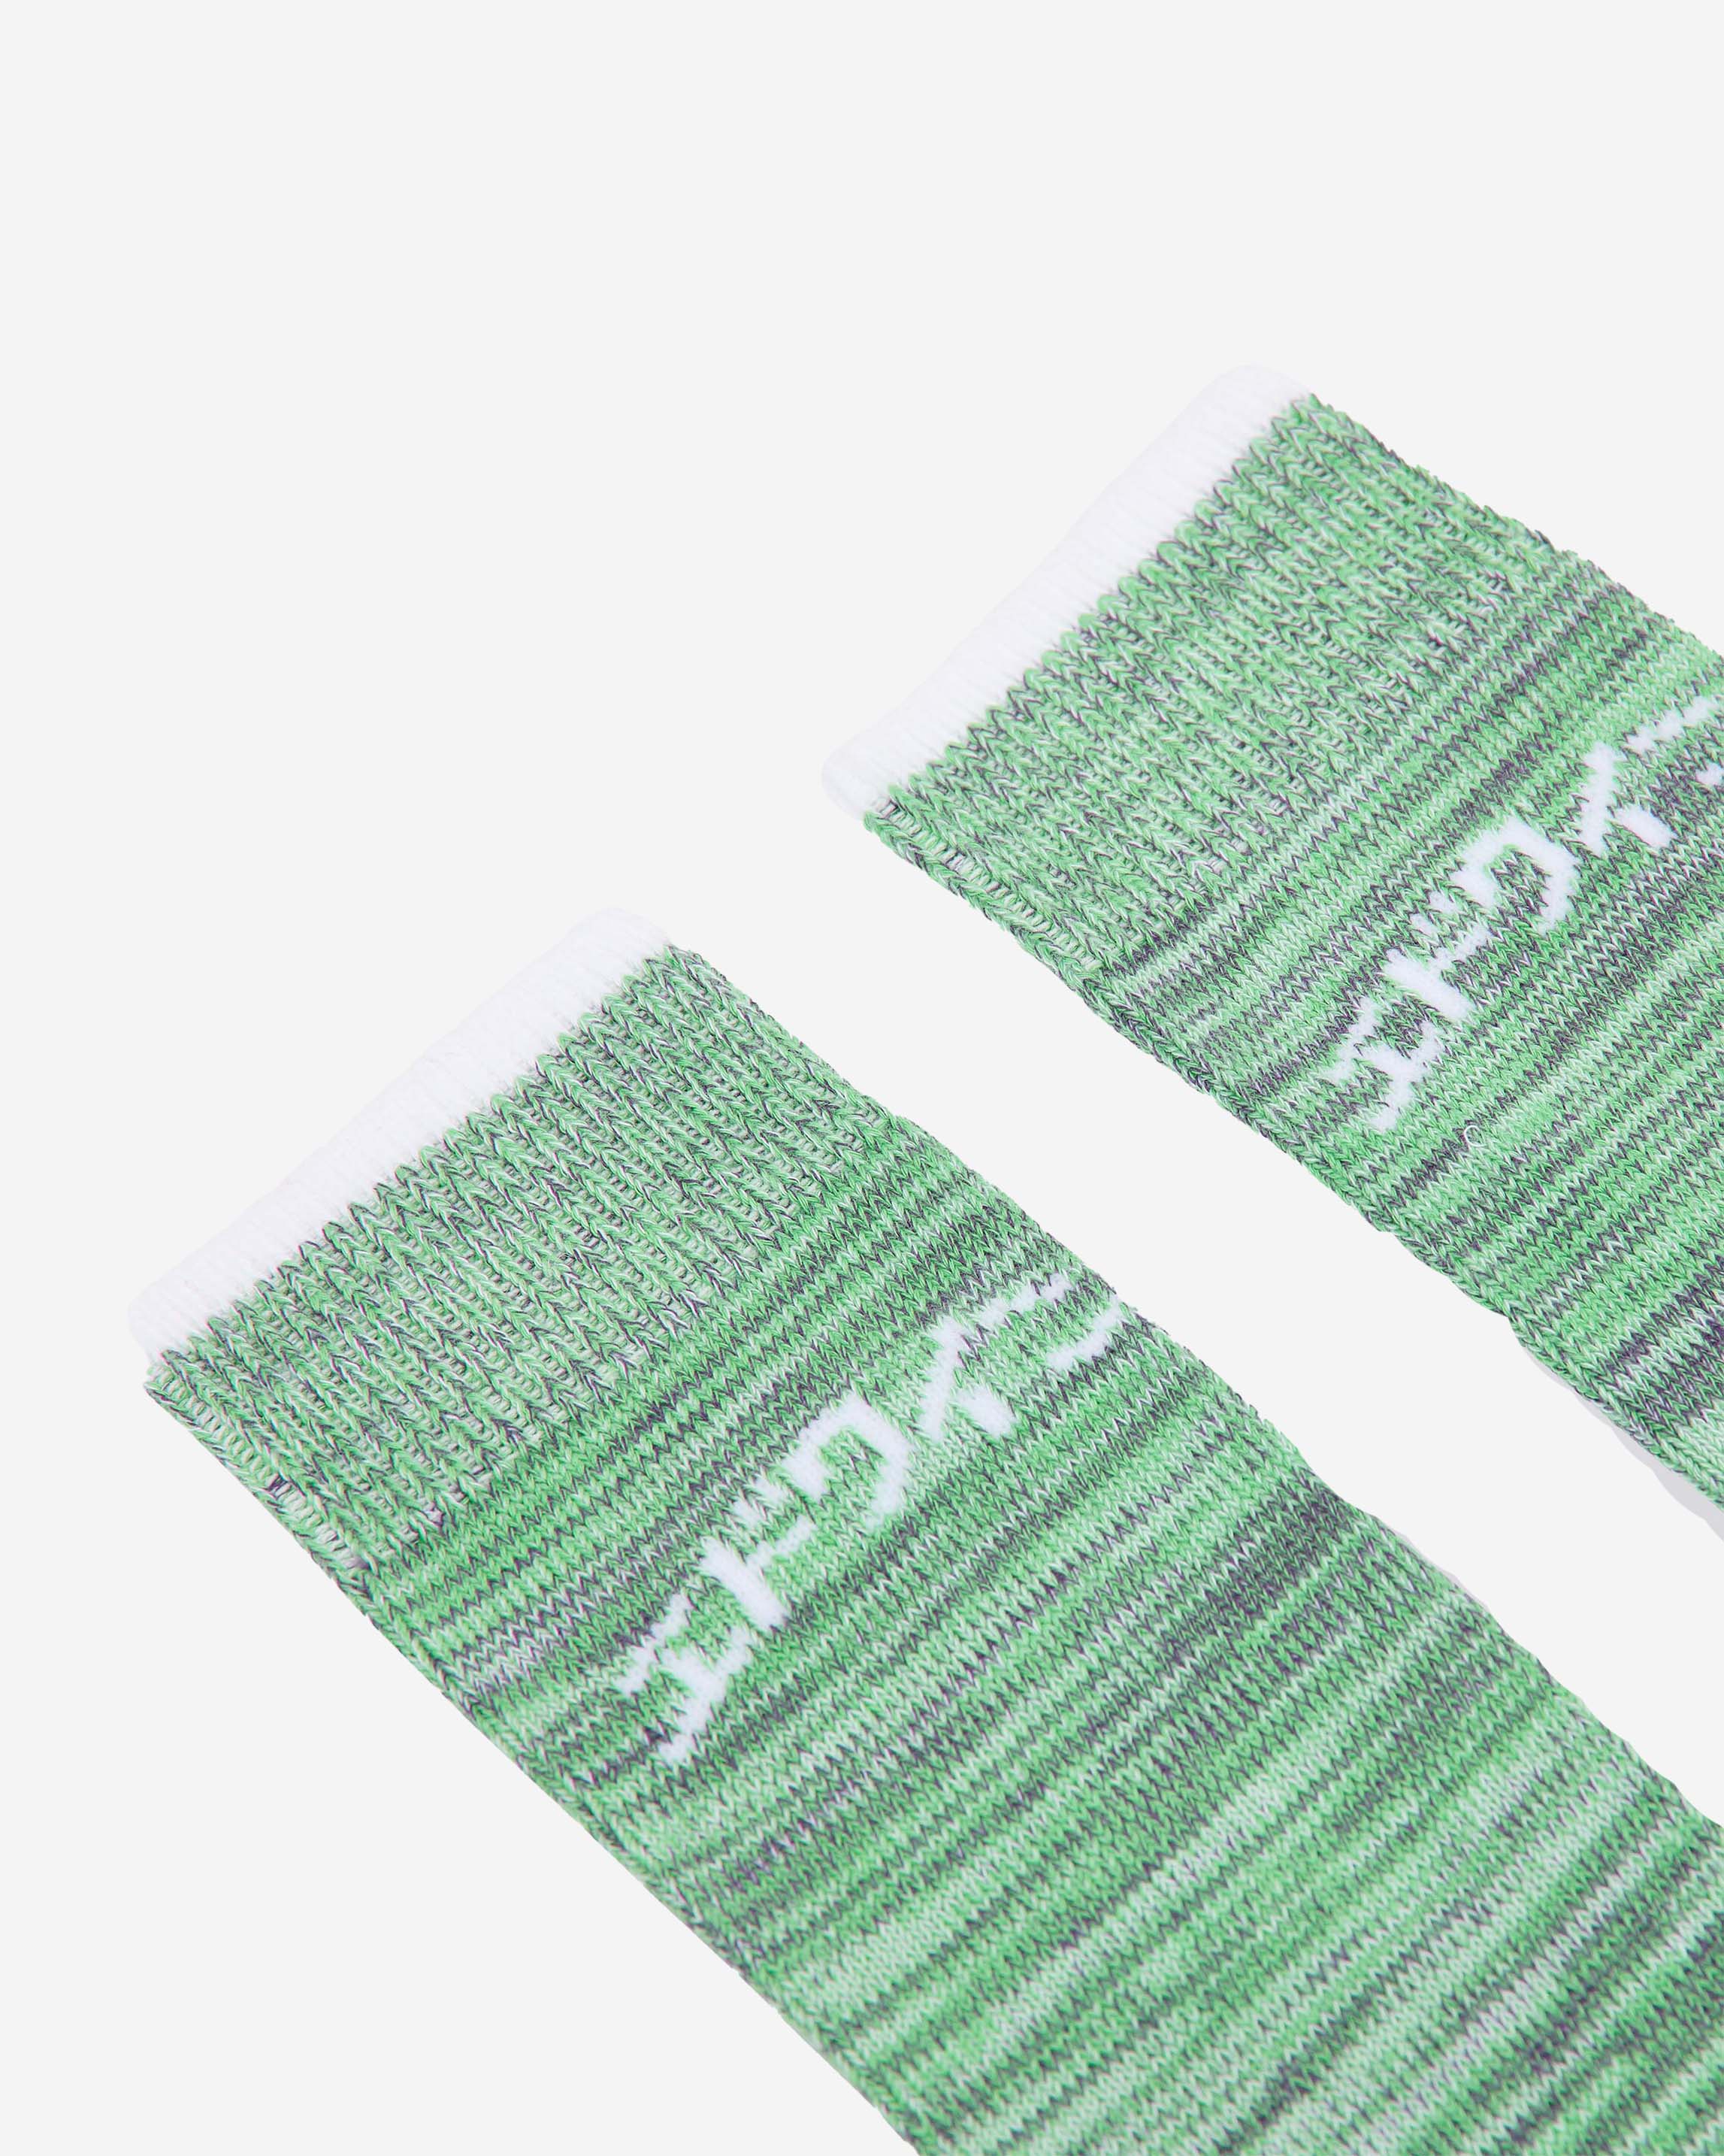 EDWIN Drip socks are regular fit accessories made from jersey knit. They are made from cotton, polyamide and elastane. Made in Portugal Socks knitted with different yarn colors with jacquard artworks jersey Knit, 90% Cotton, 9% Polyamide, 1% Elastane